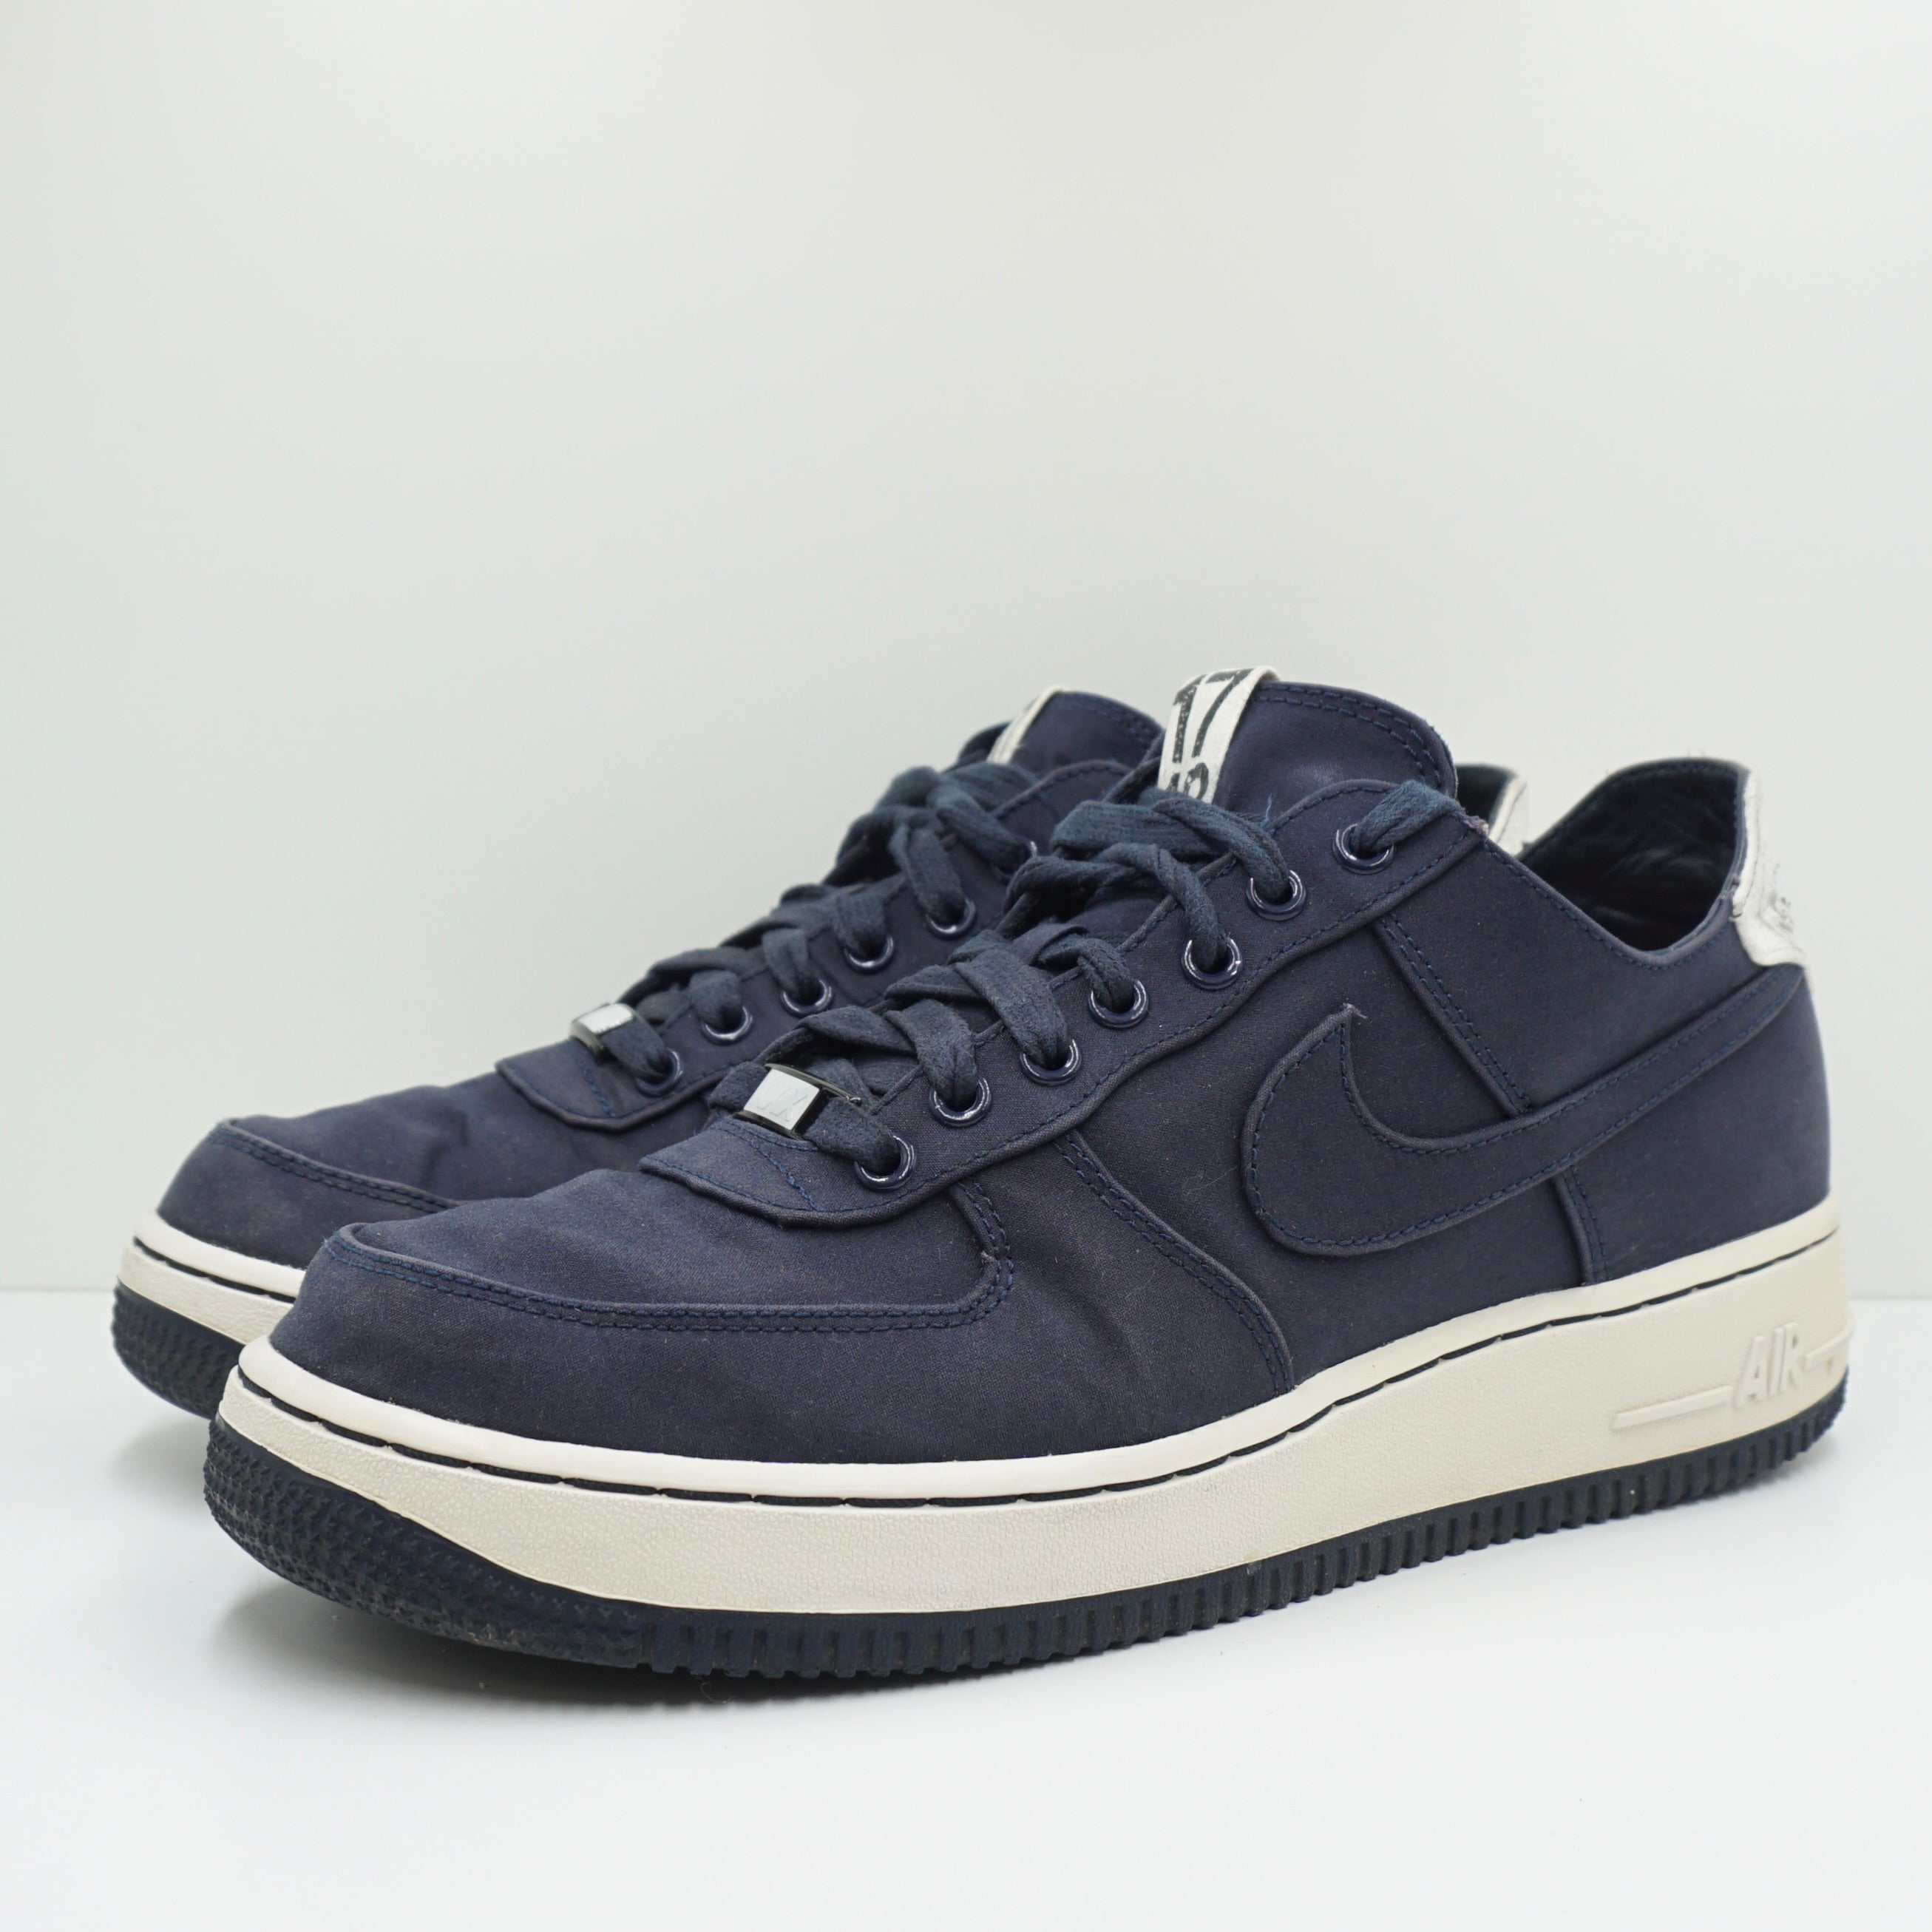 Nike Air Force 1 Low NRG x Dover Street Market